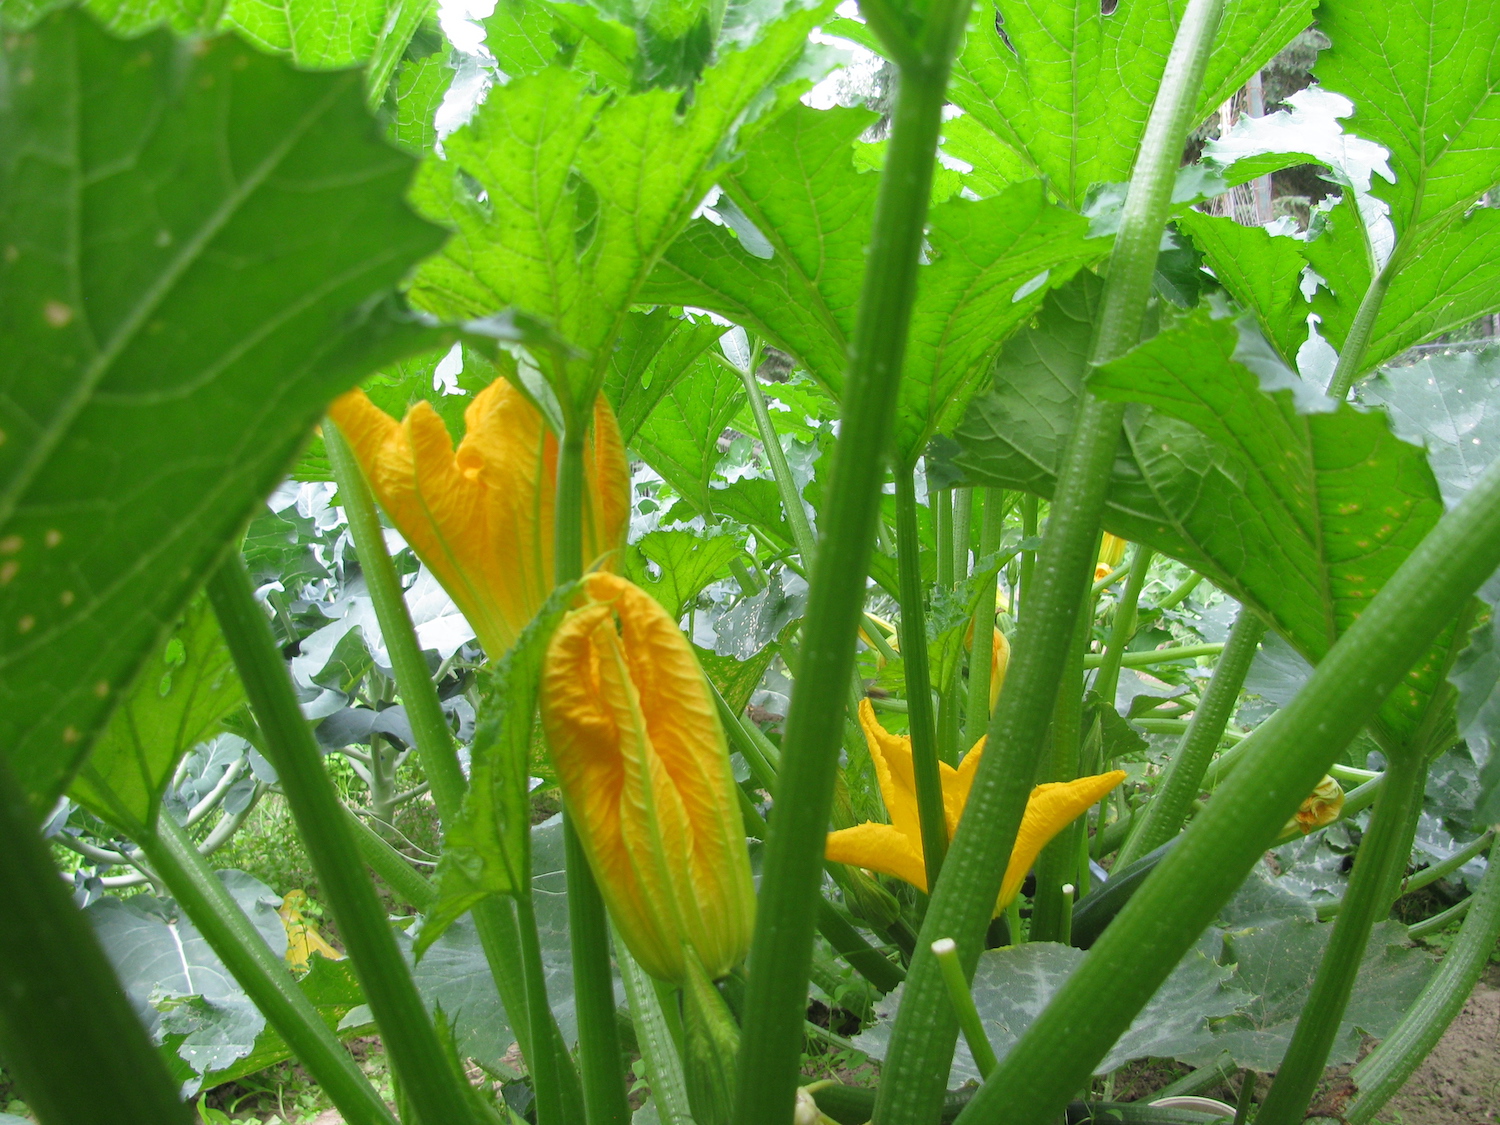 Green zucchini stalks and leaves, and yellow flowers, fill the photo frame.